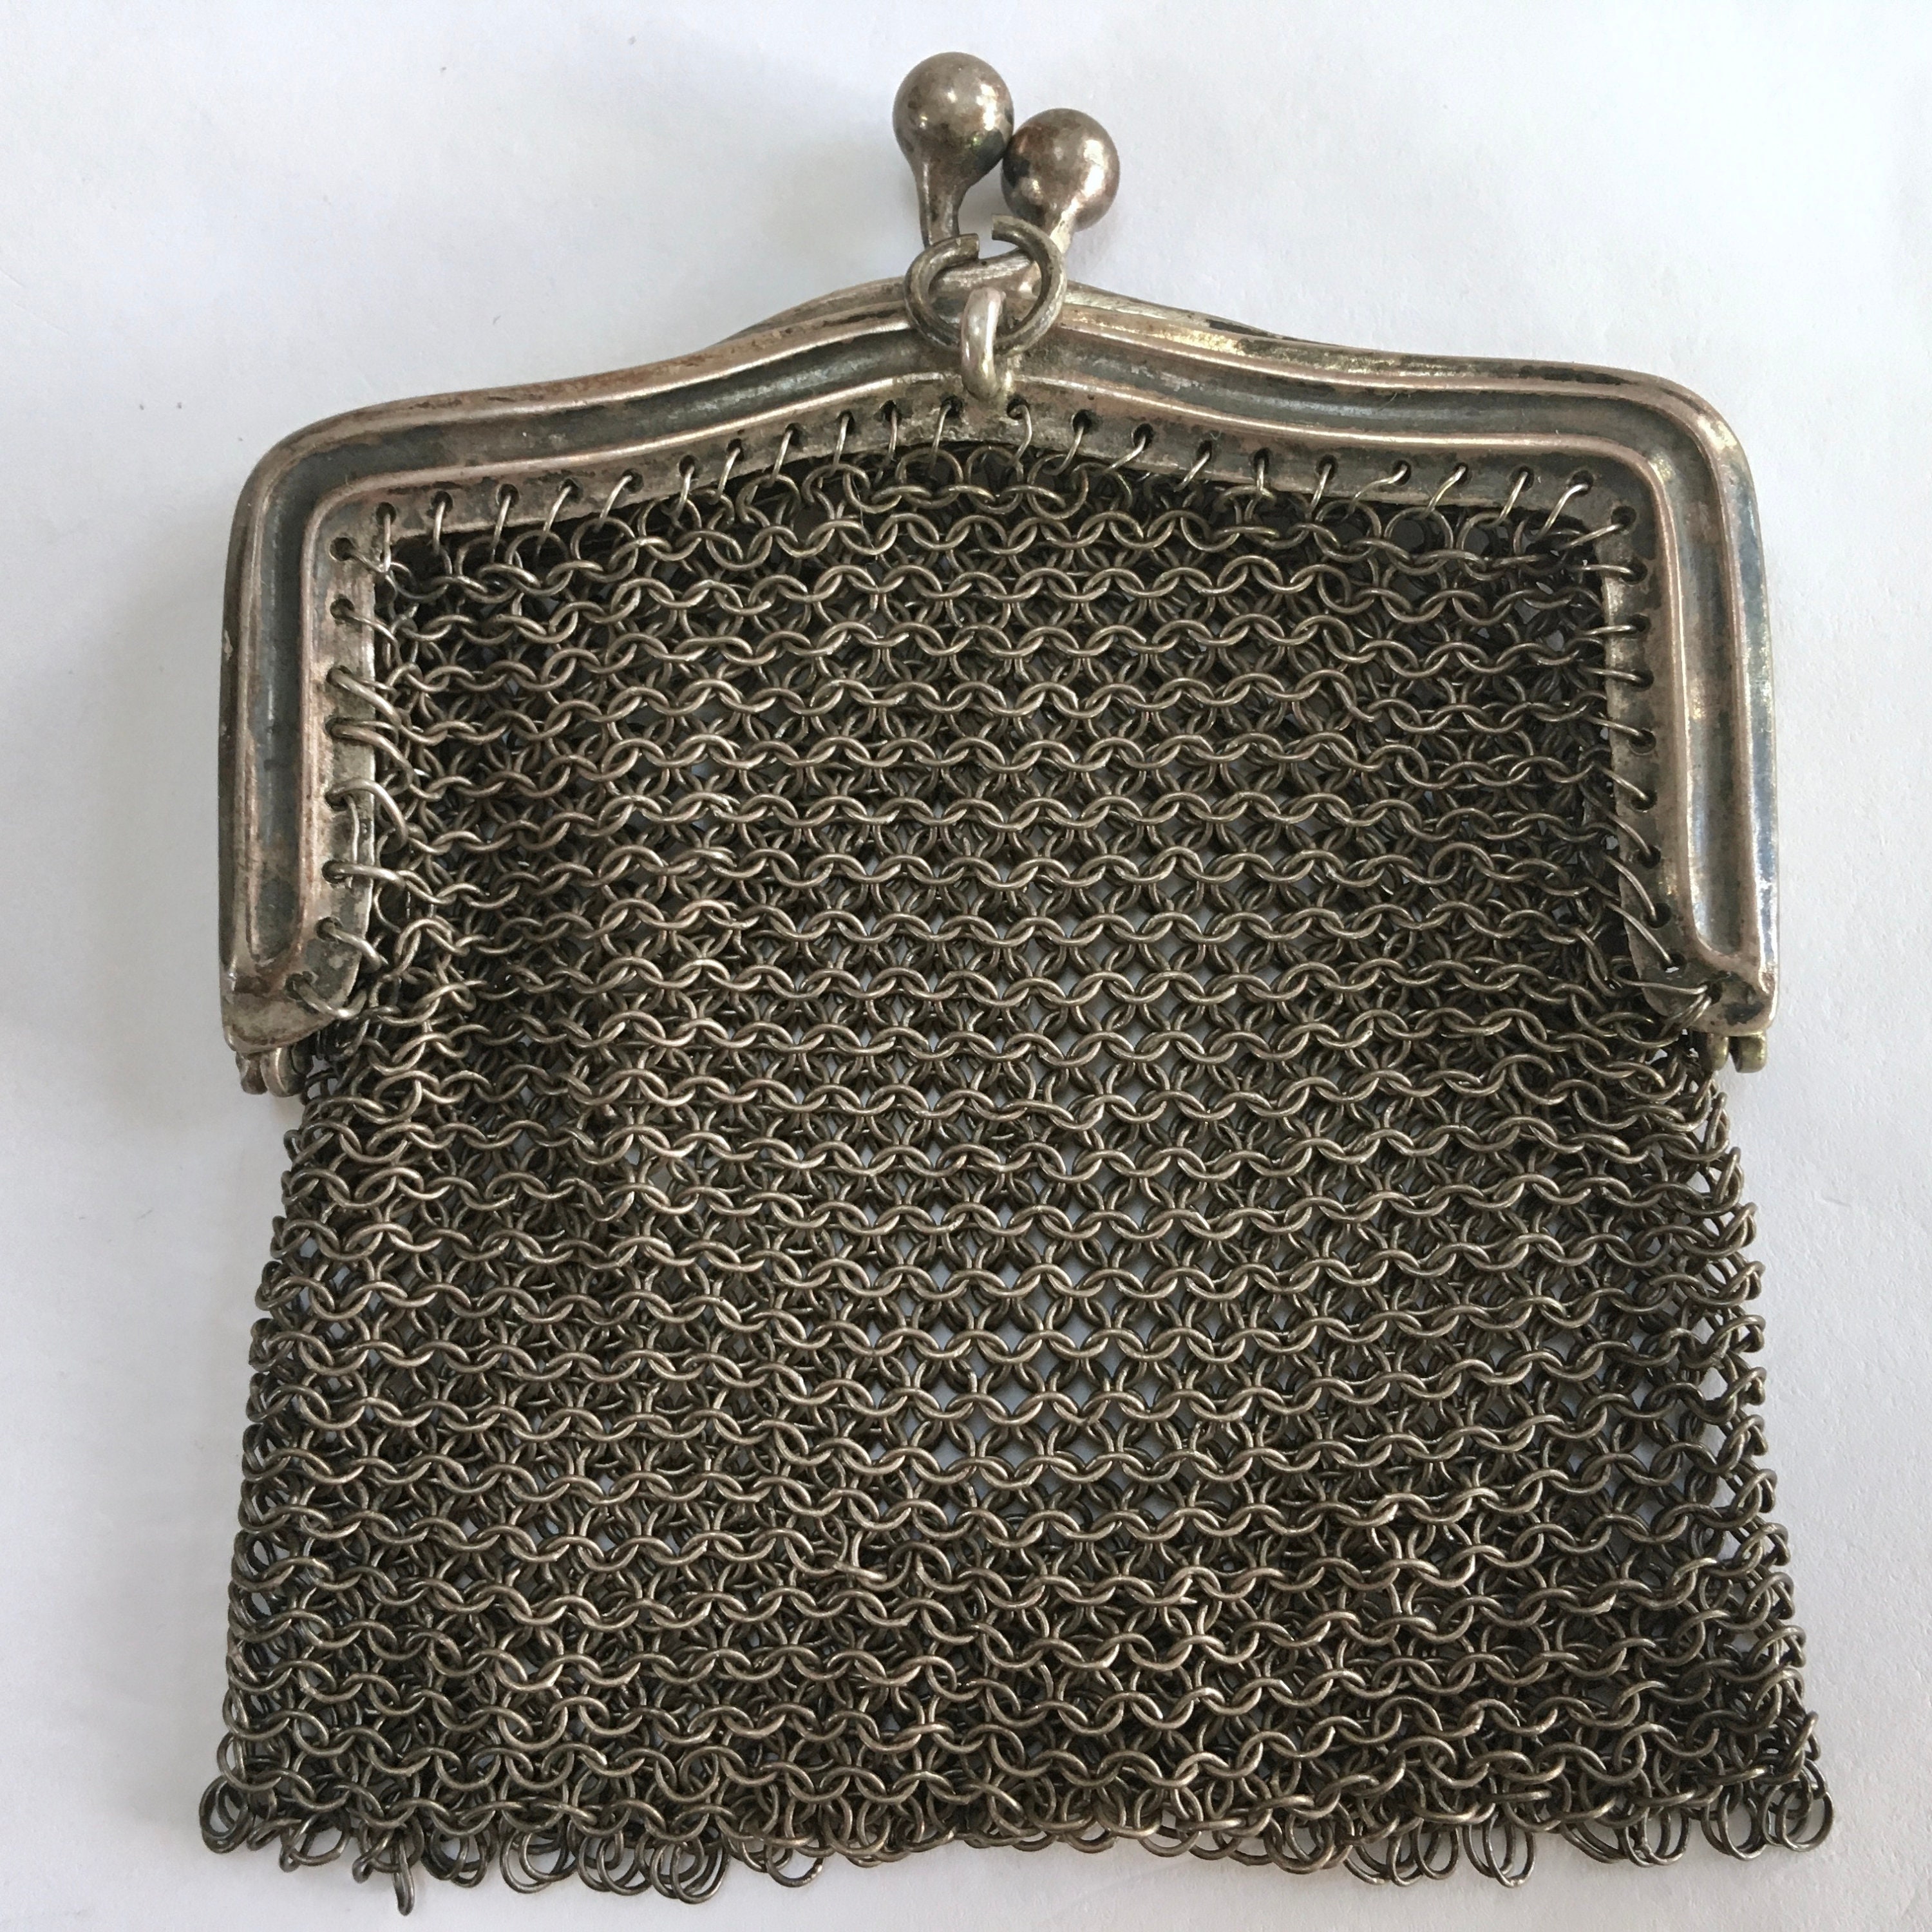 Lot - SMALL STERLING SILVER MESH COIN PURSE, MARKED WITH THE BRITISH IMPORT  MARK, 925, DATE LETTER R FOR 1912 AND MAKERS MARK C&C AS WELL AS A  MINIATURE PILL BOX SET